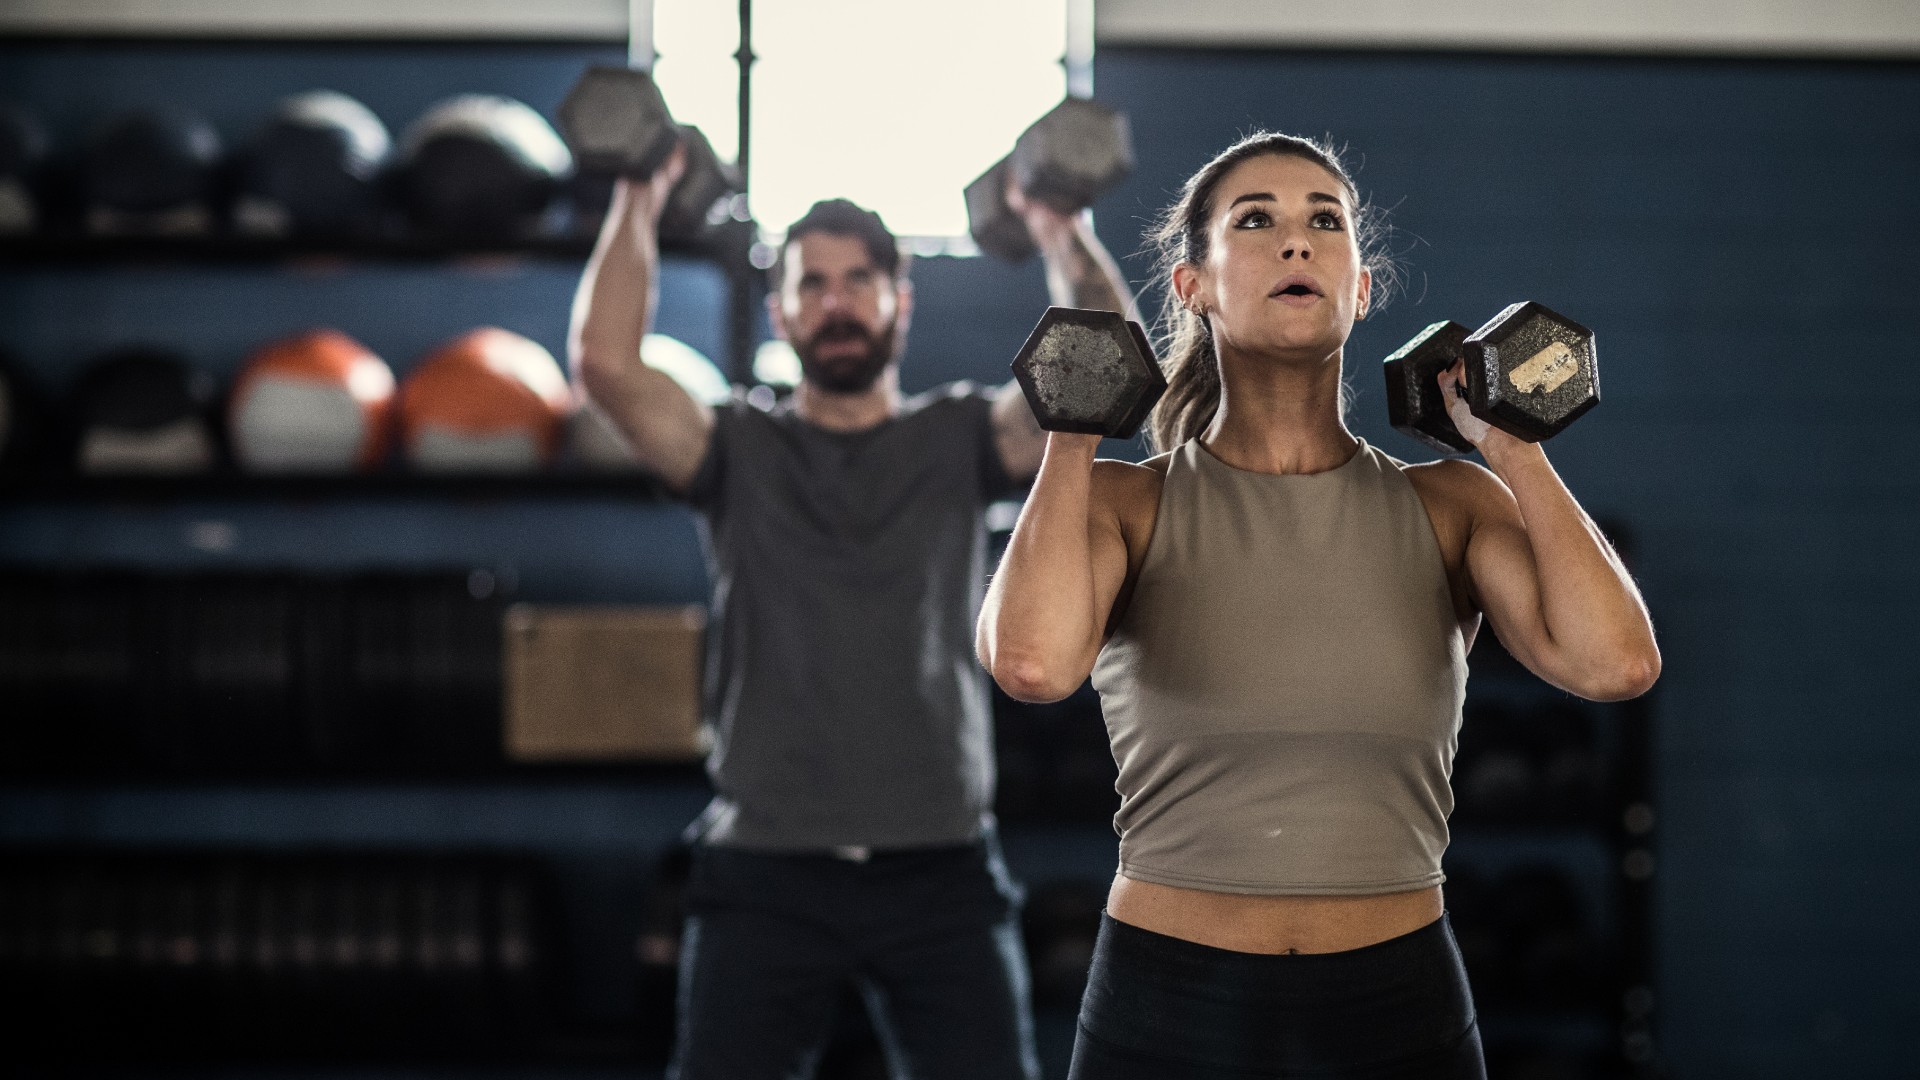 Want to try CrossFit? Start with this 4-move dumbbell workout | T3